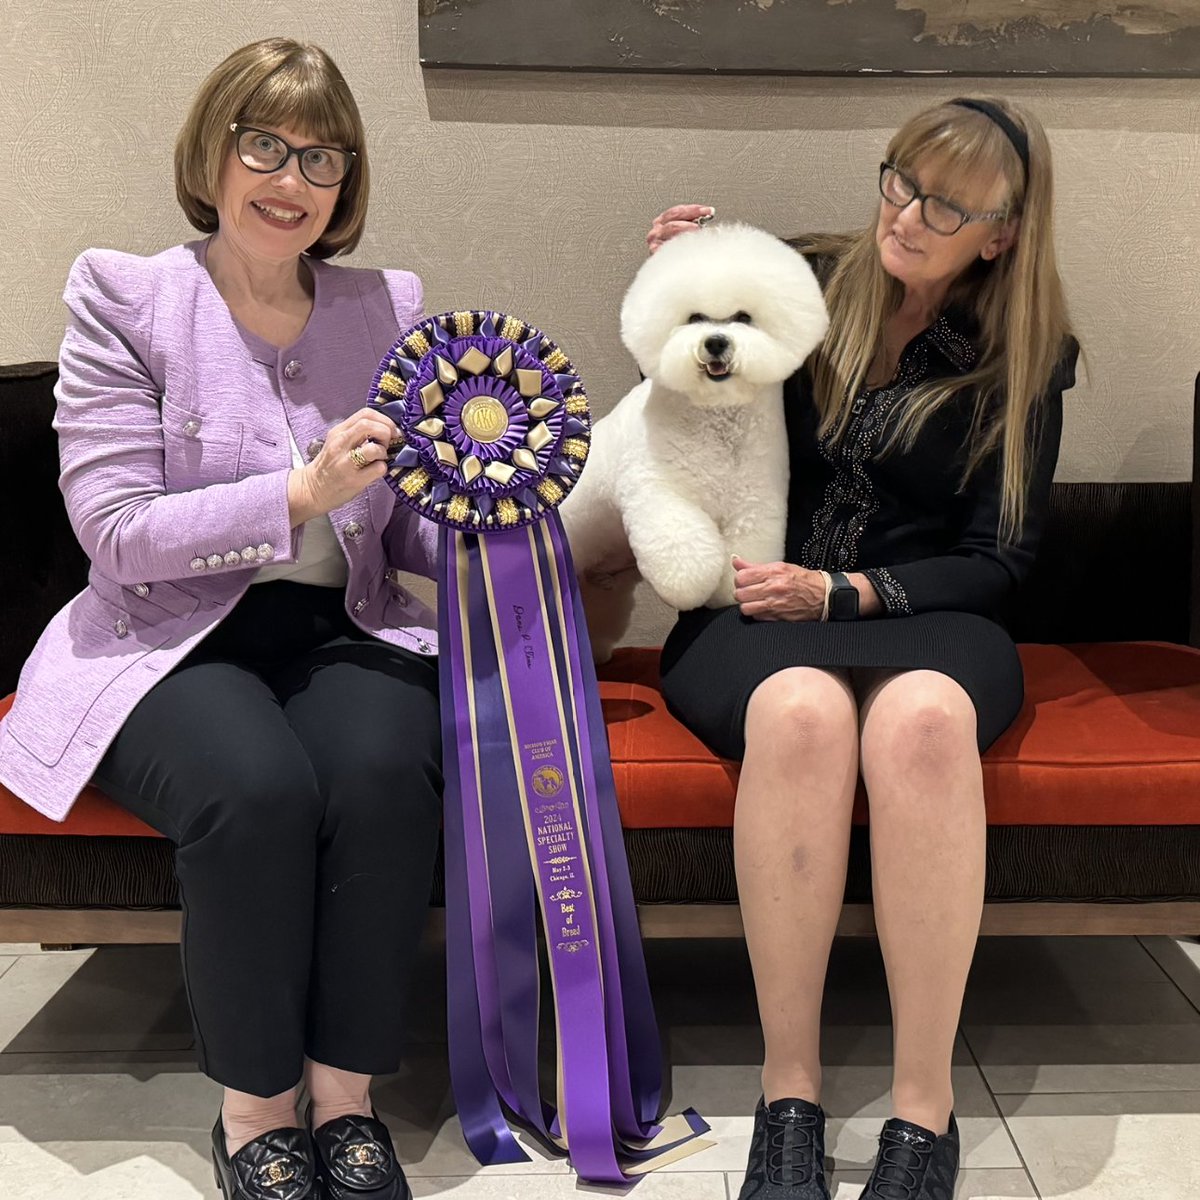 You may know I'm CEO of @American_Heart, but for many years I've also sponsored Grand Champion show dogs - a hobby combining my passion for inspiring health & pet ownership. This Mon., May 13, join me on IG @NancyAtHeart as Kix, Neal, and Clark compete in @WKCDOGS in New York!